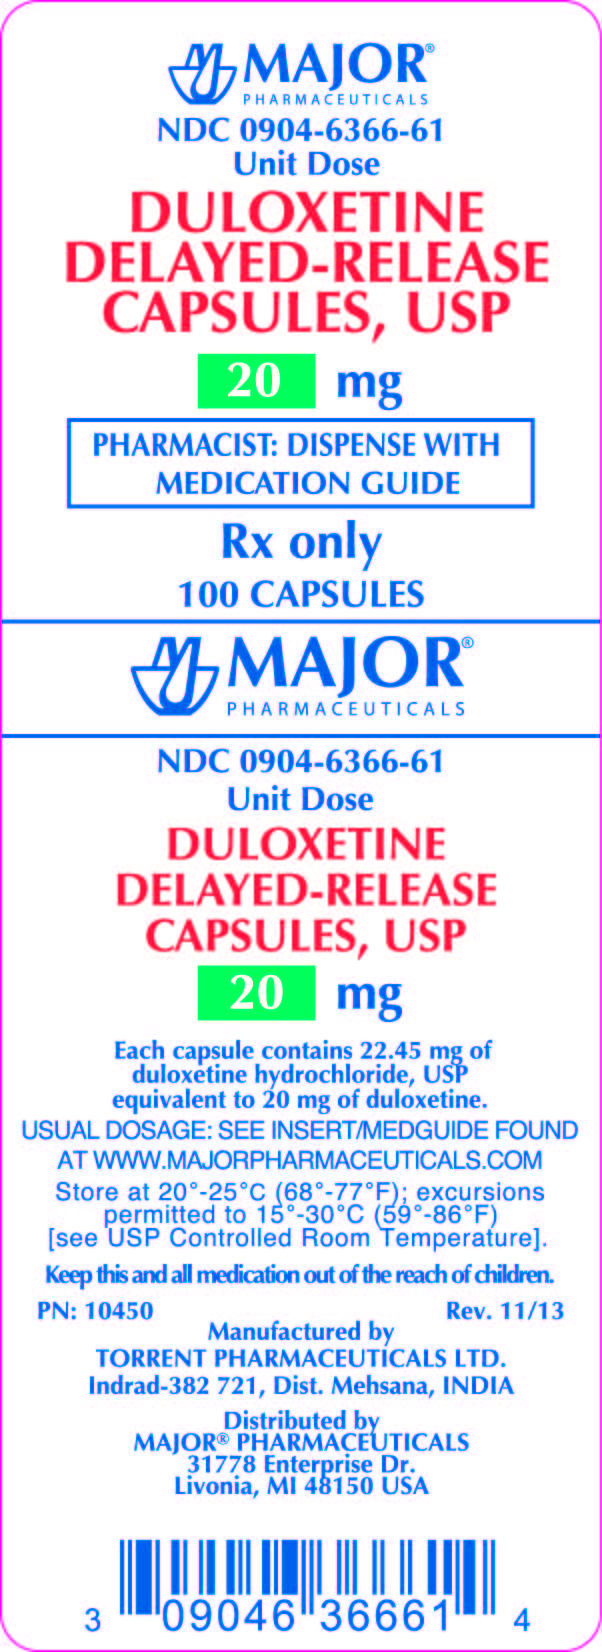 DULOXETINE DELAYED-RELEASE CAPSULES, USP 20MG